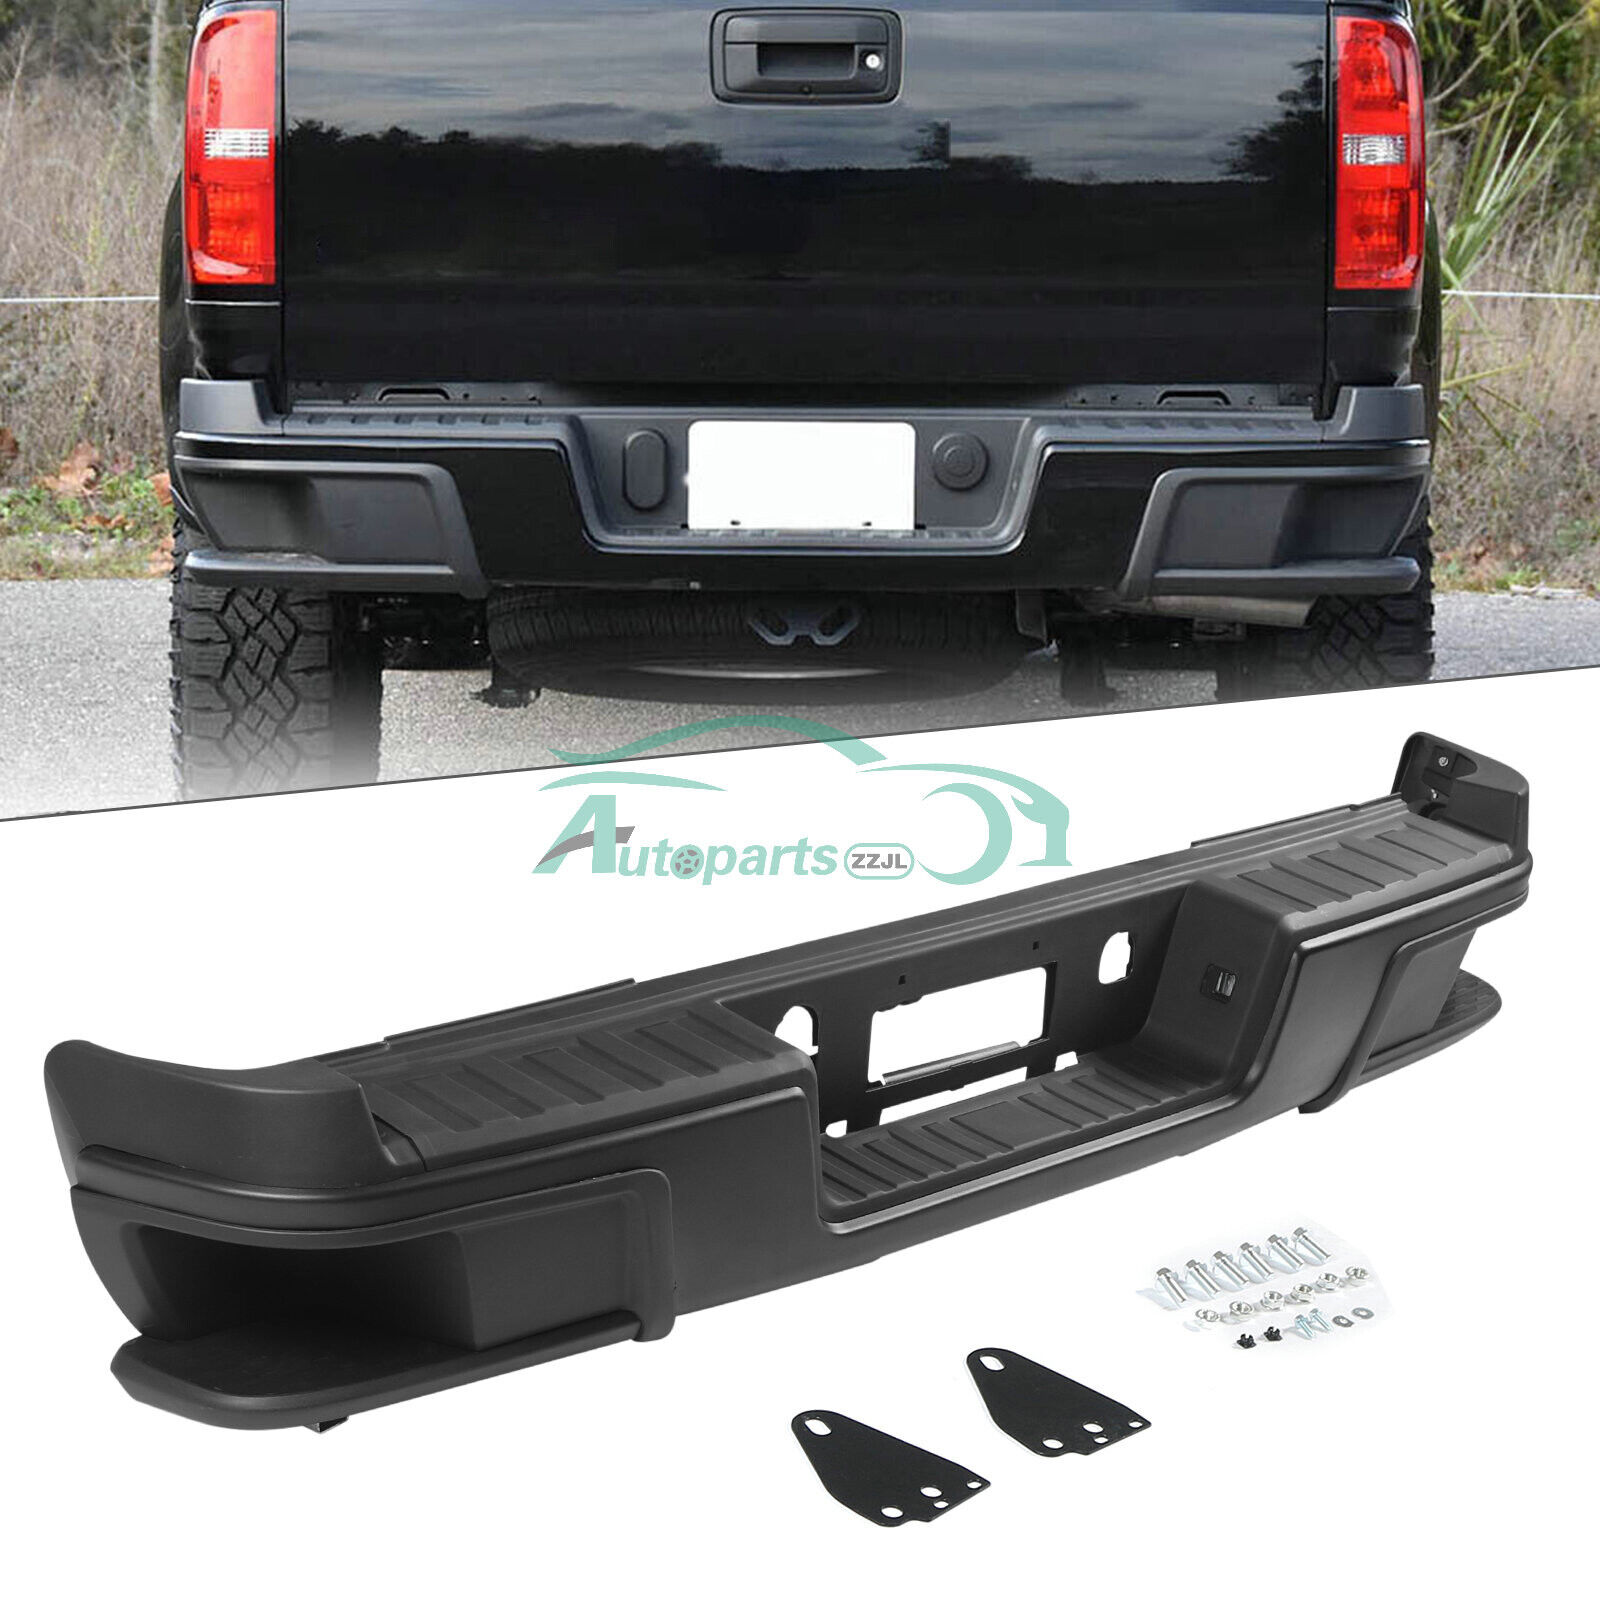 US STOCK Rear Step Bumper Assembly for 2015-2022 Chevy Colorado GMC Canyon Black